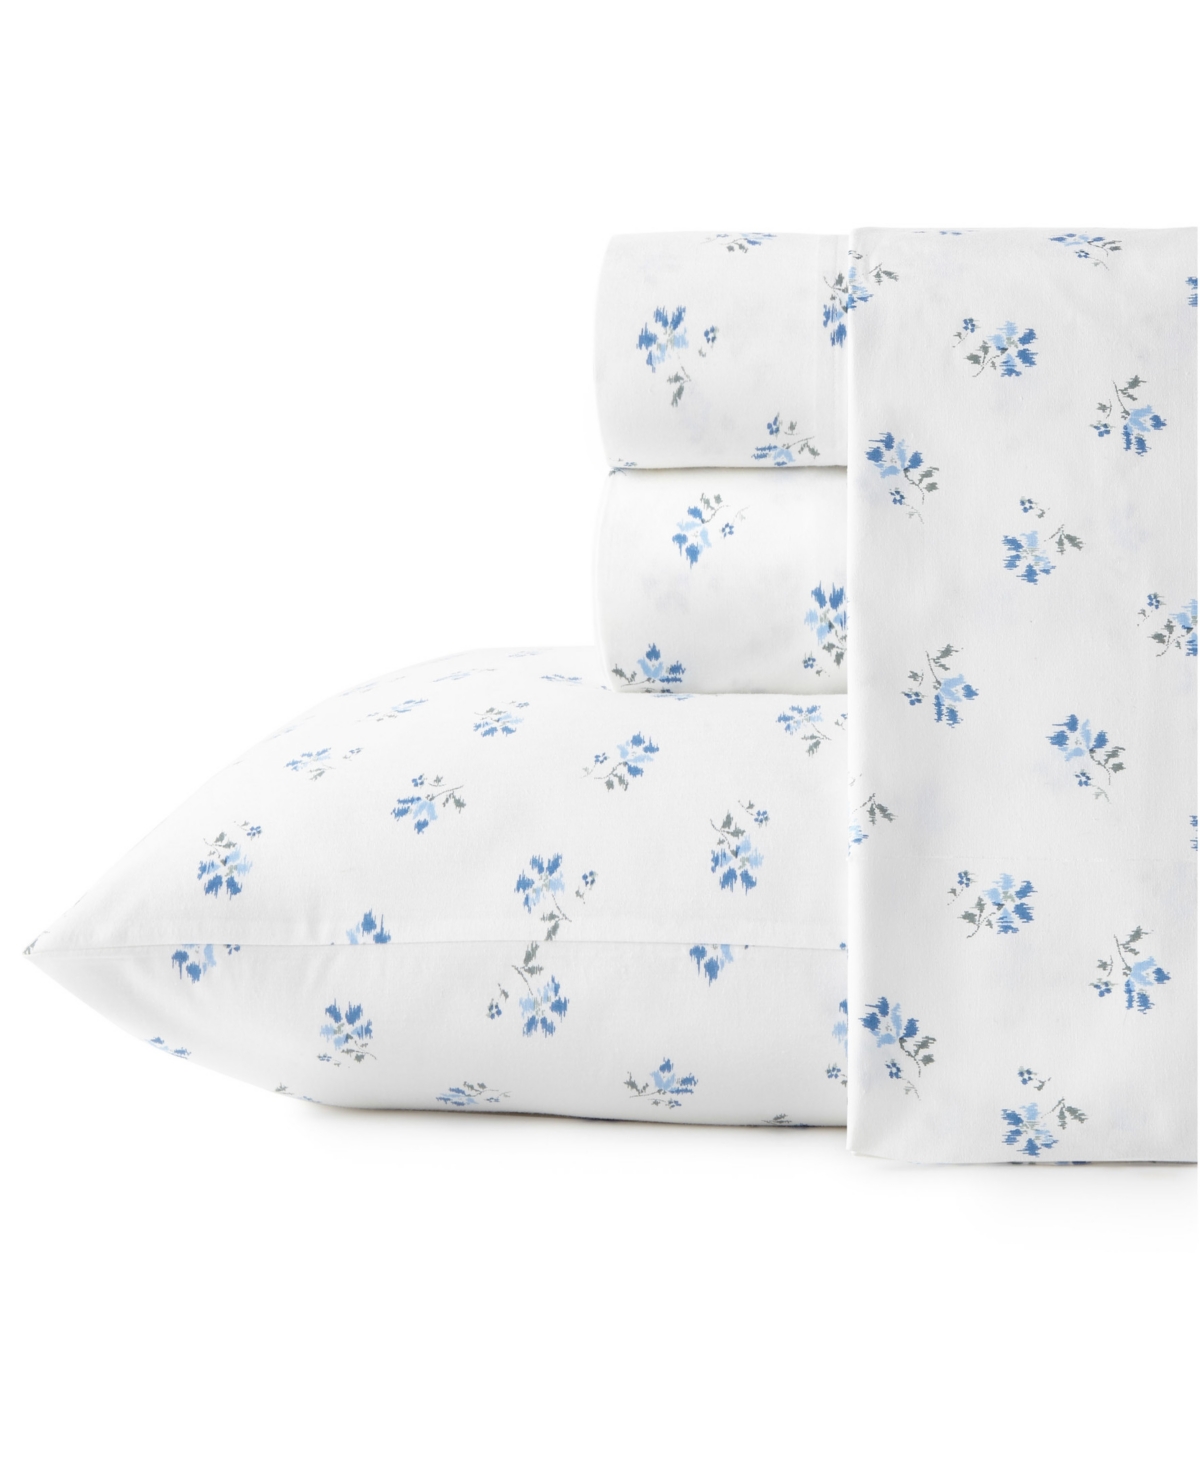 Stone Cottage Cotton Percale 4 Piece Sheet Set, Full In Sketchy Ditsy